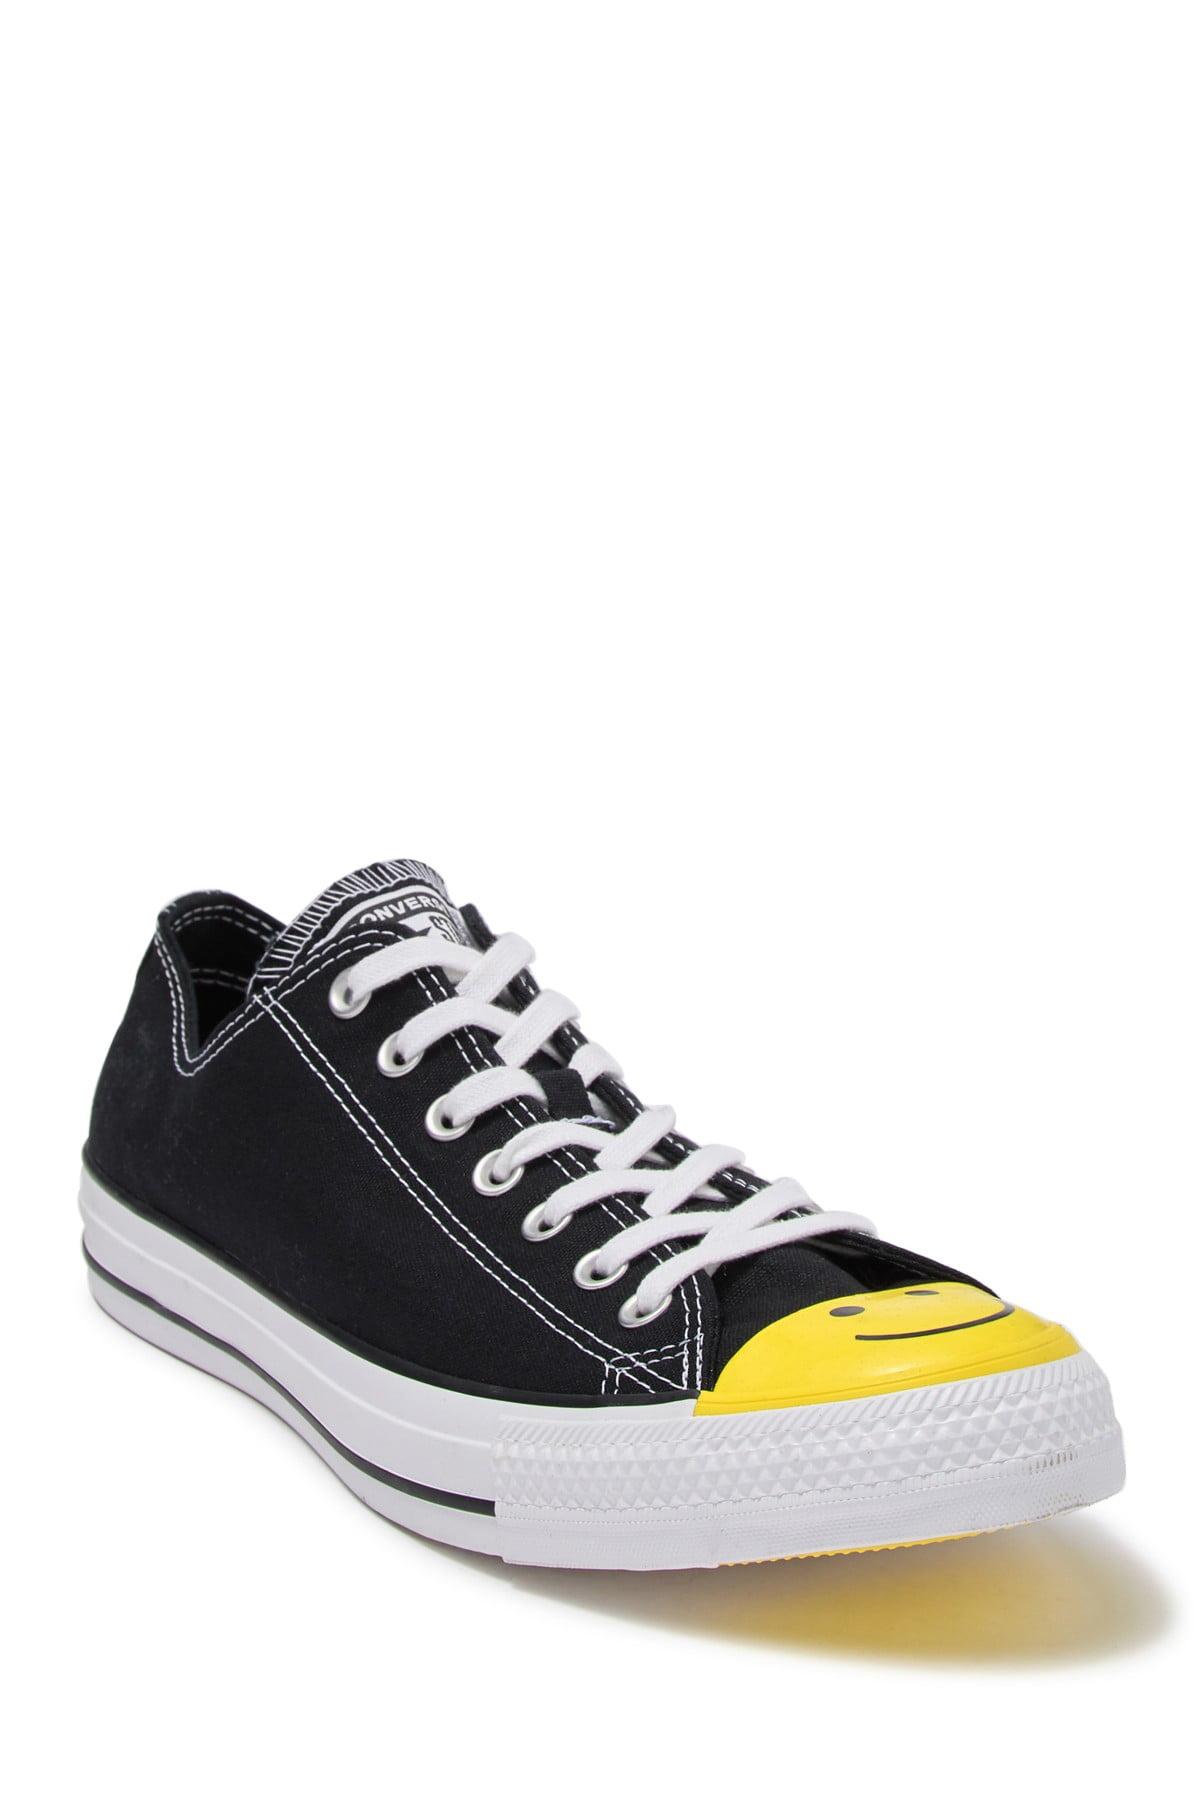 Converse Chuck Taylor All Star Ox Yellow Smiley Face Toe Low Top Sneaker in  Black for Men | Lyst